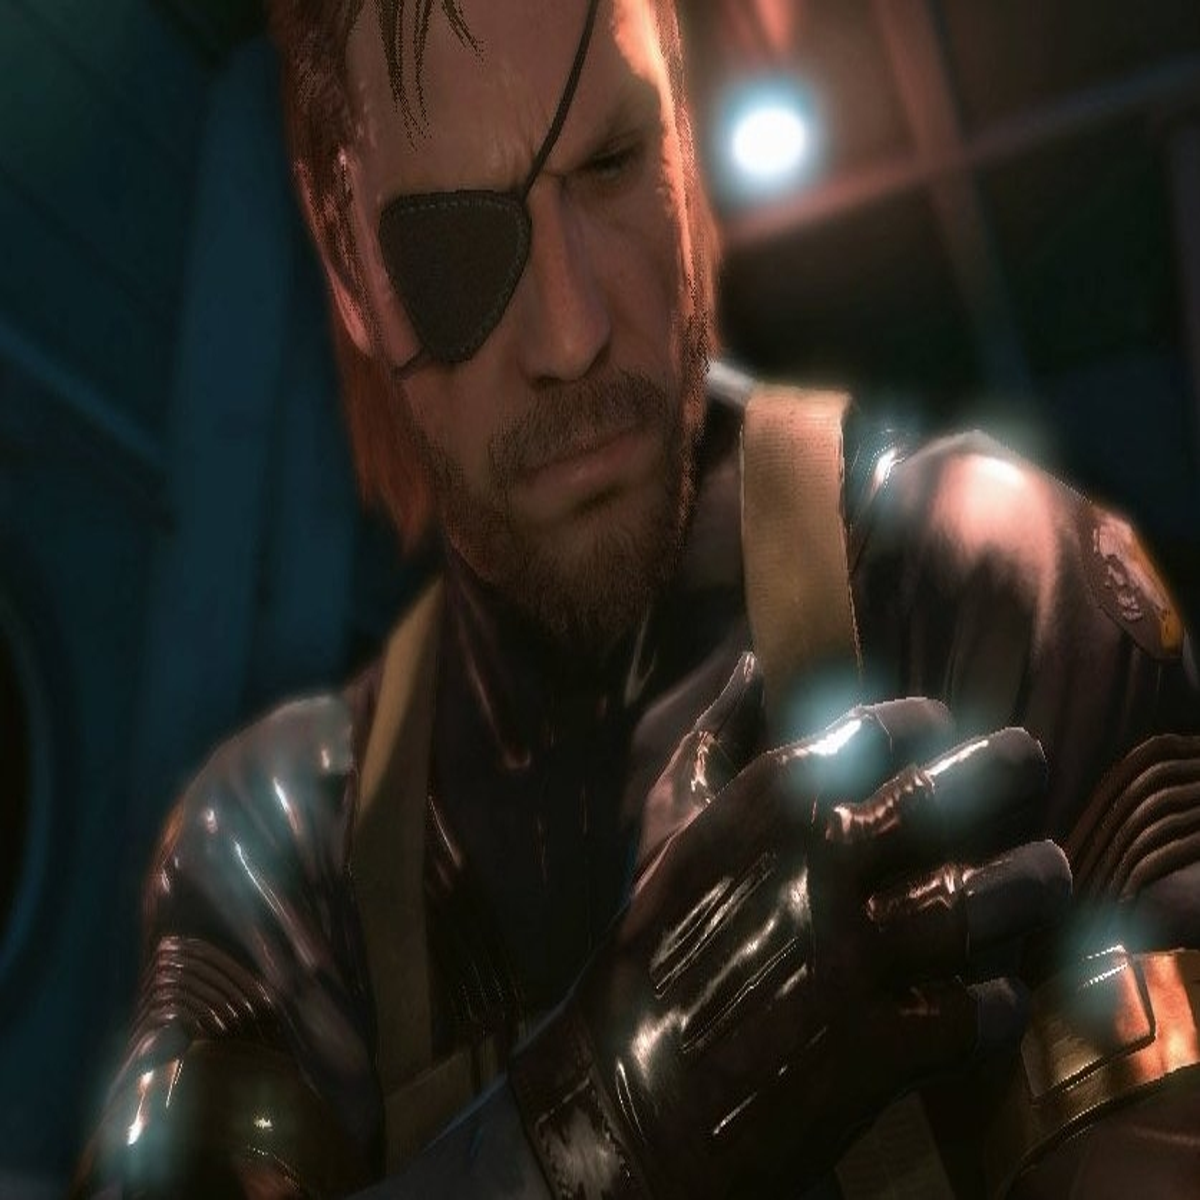 Metal Gear Solid 5: The Phantom Pain - Side Ops 01 Extract